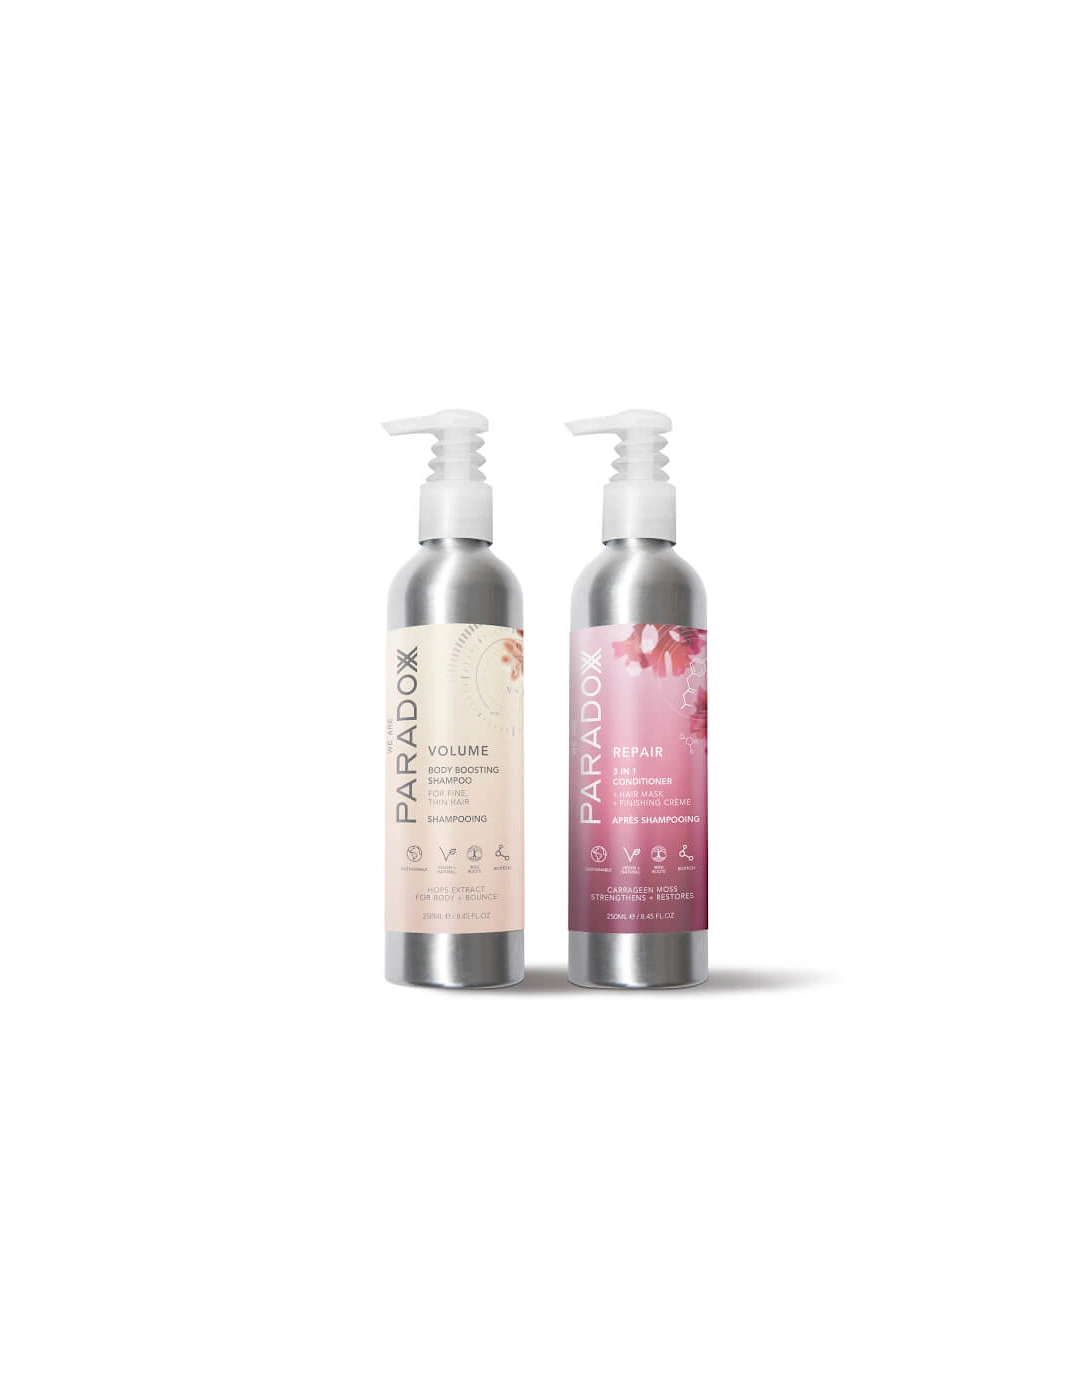 Volume Shampoo and Repair 3-in-1 Conditioner, 2 of 1